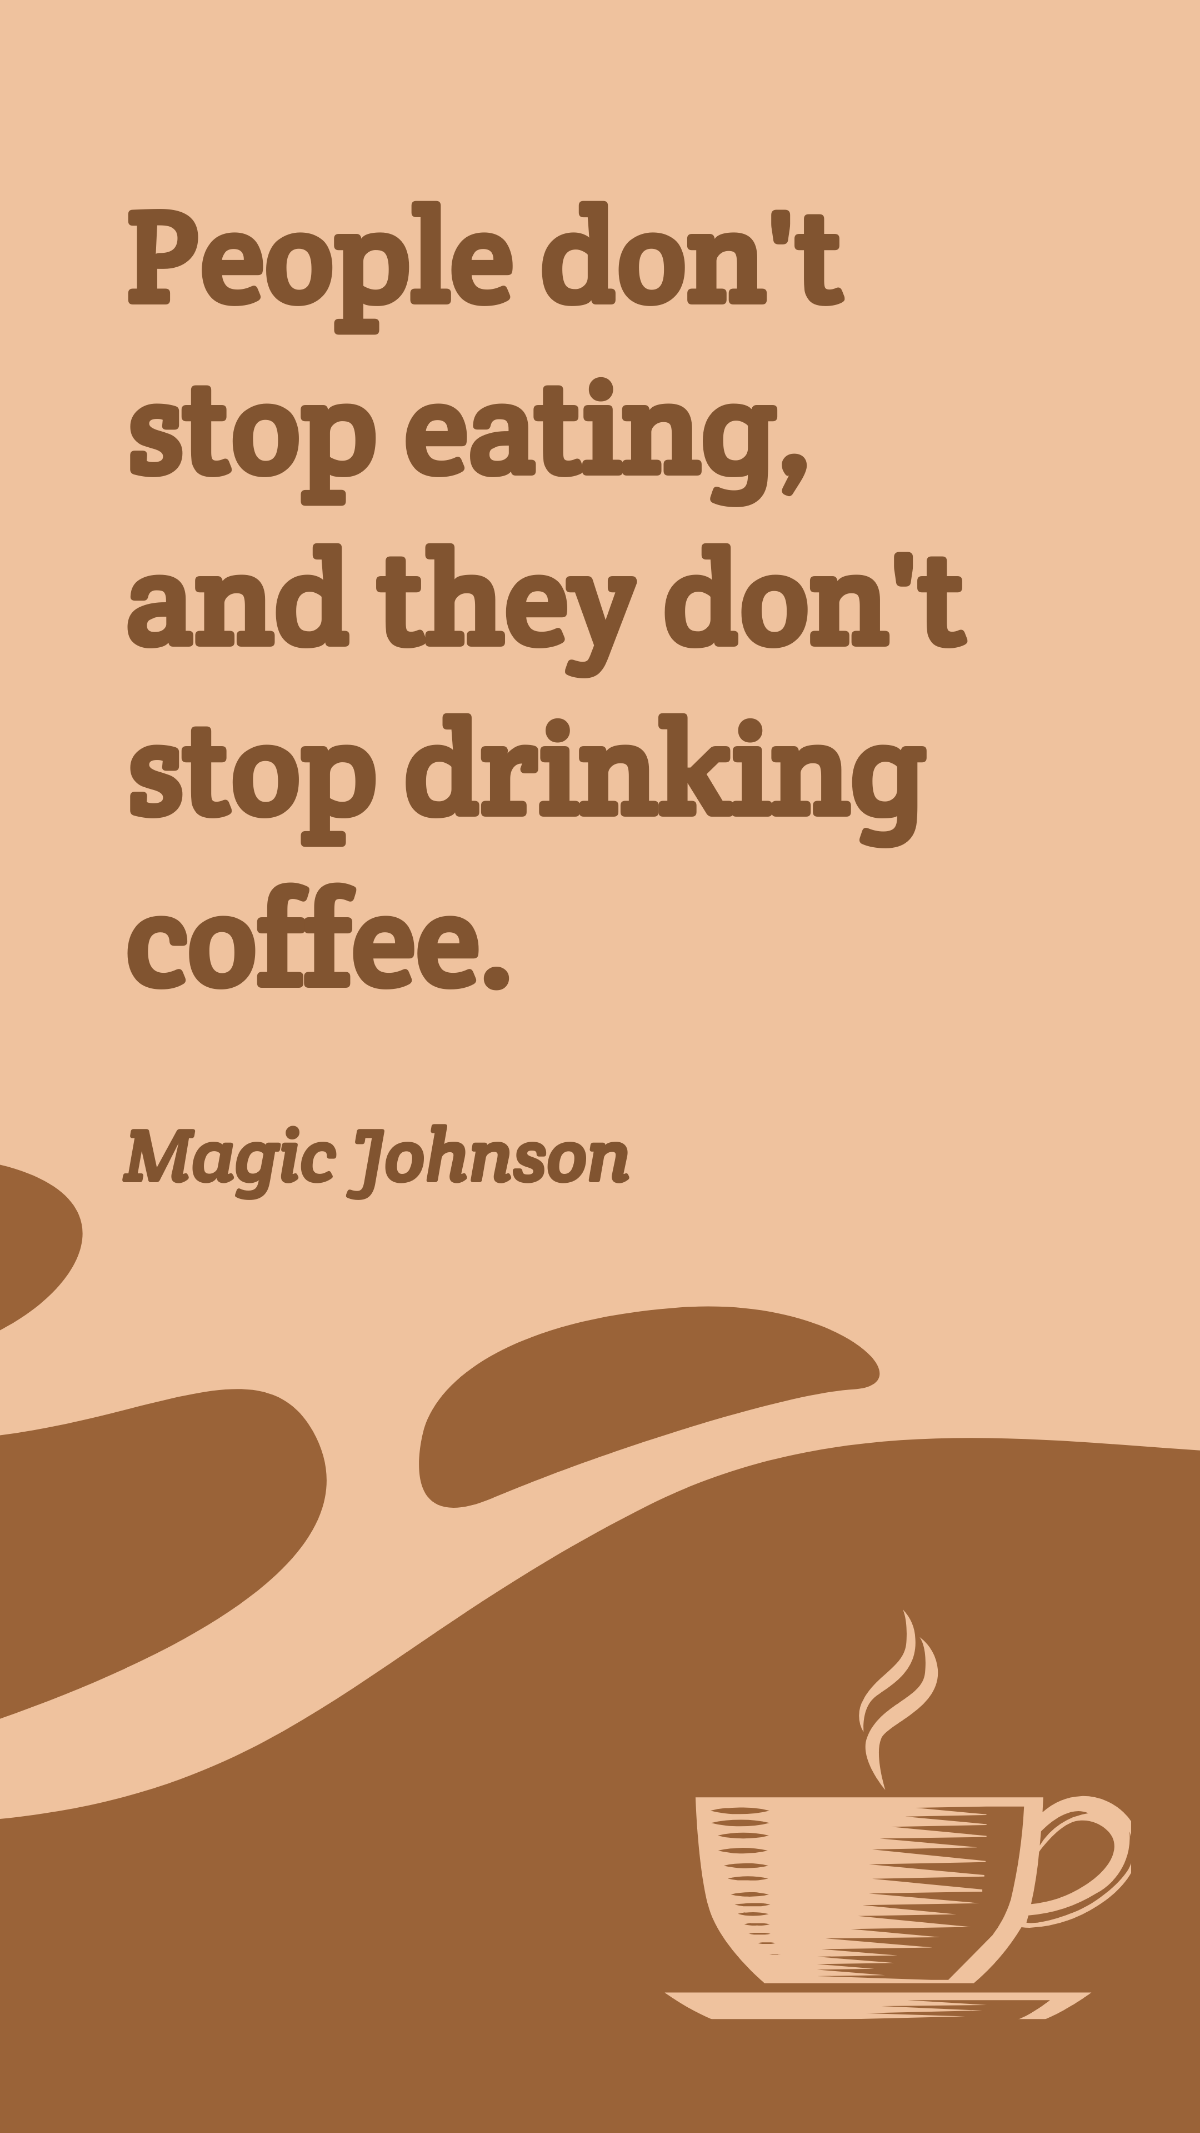 Magic Johnson - People don't stop eating, and they don't stop drinking coffee. Template